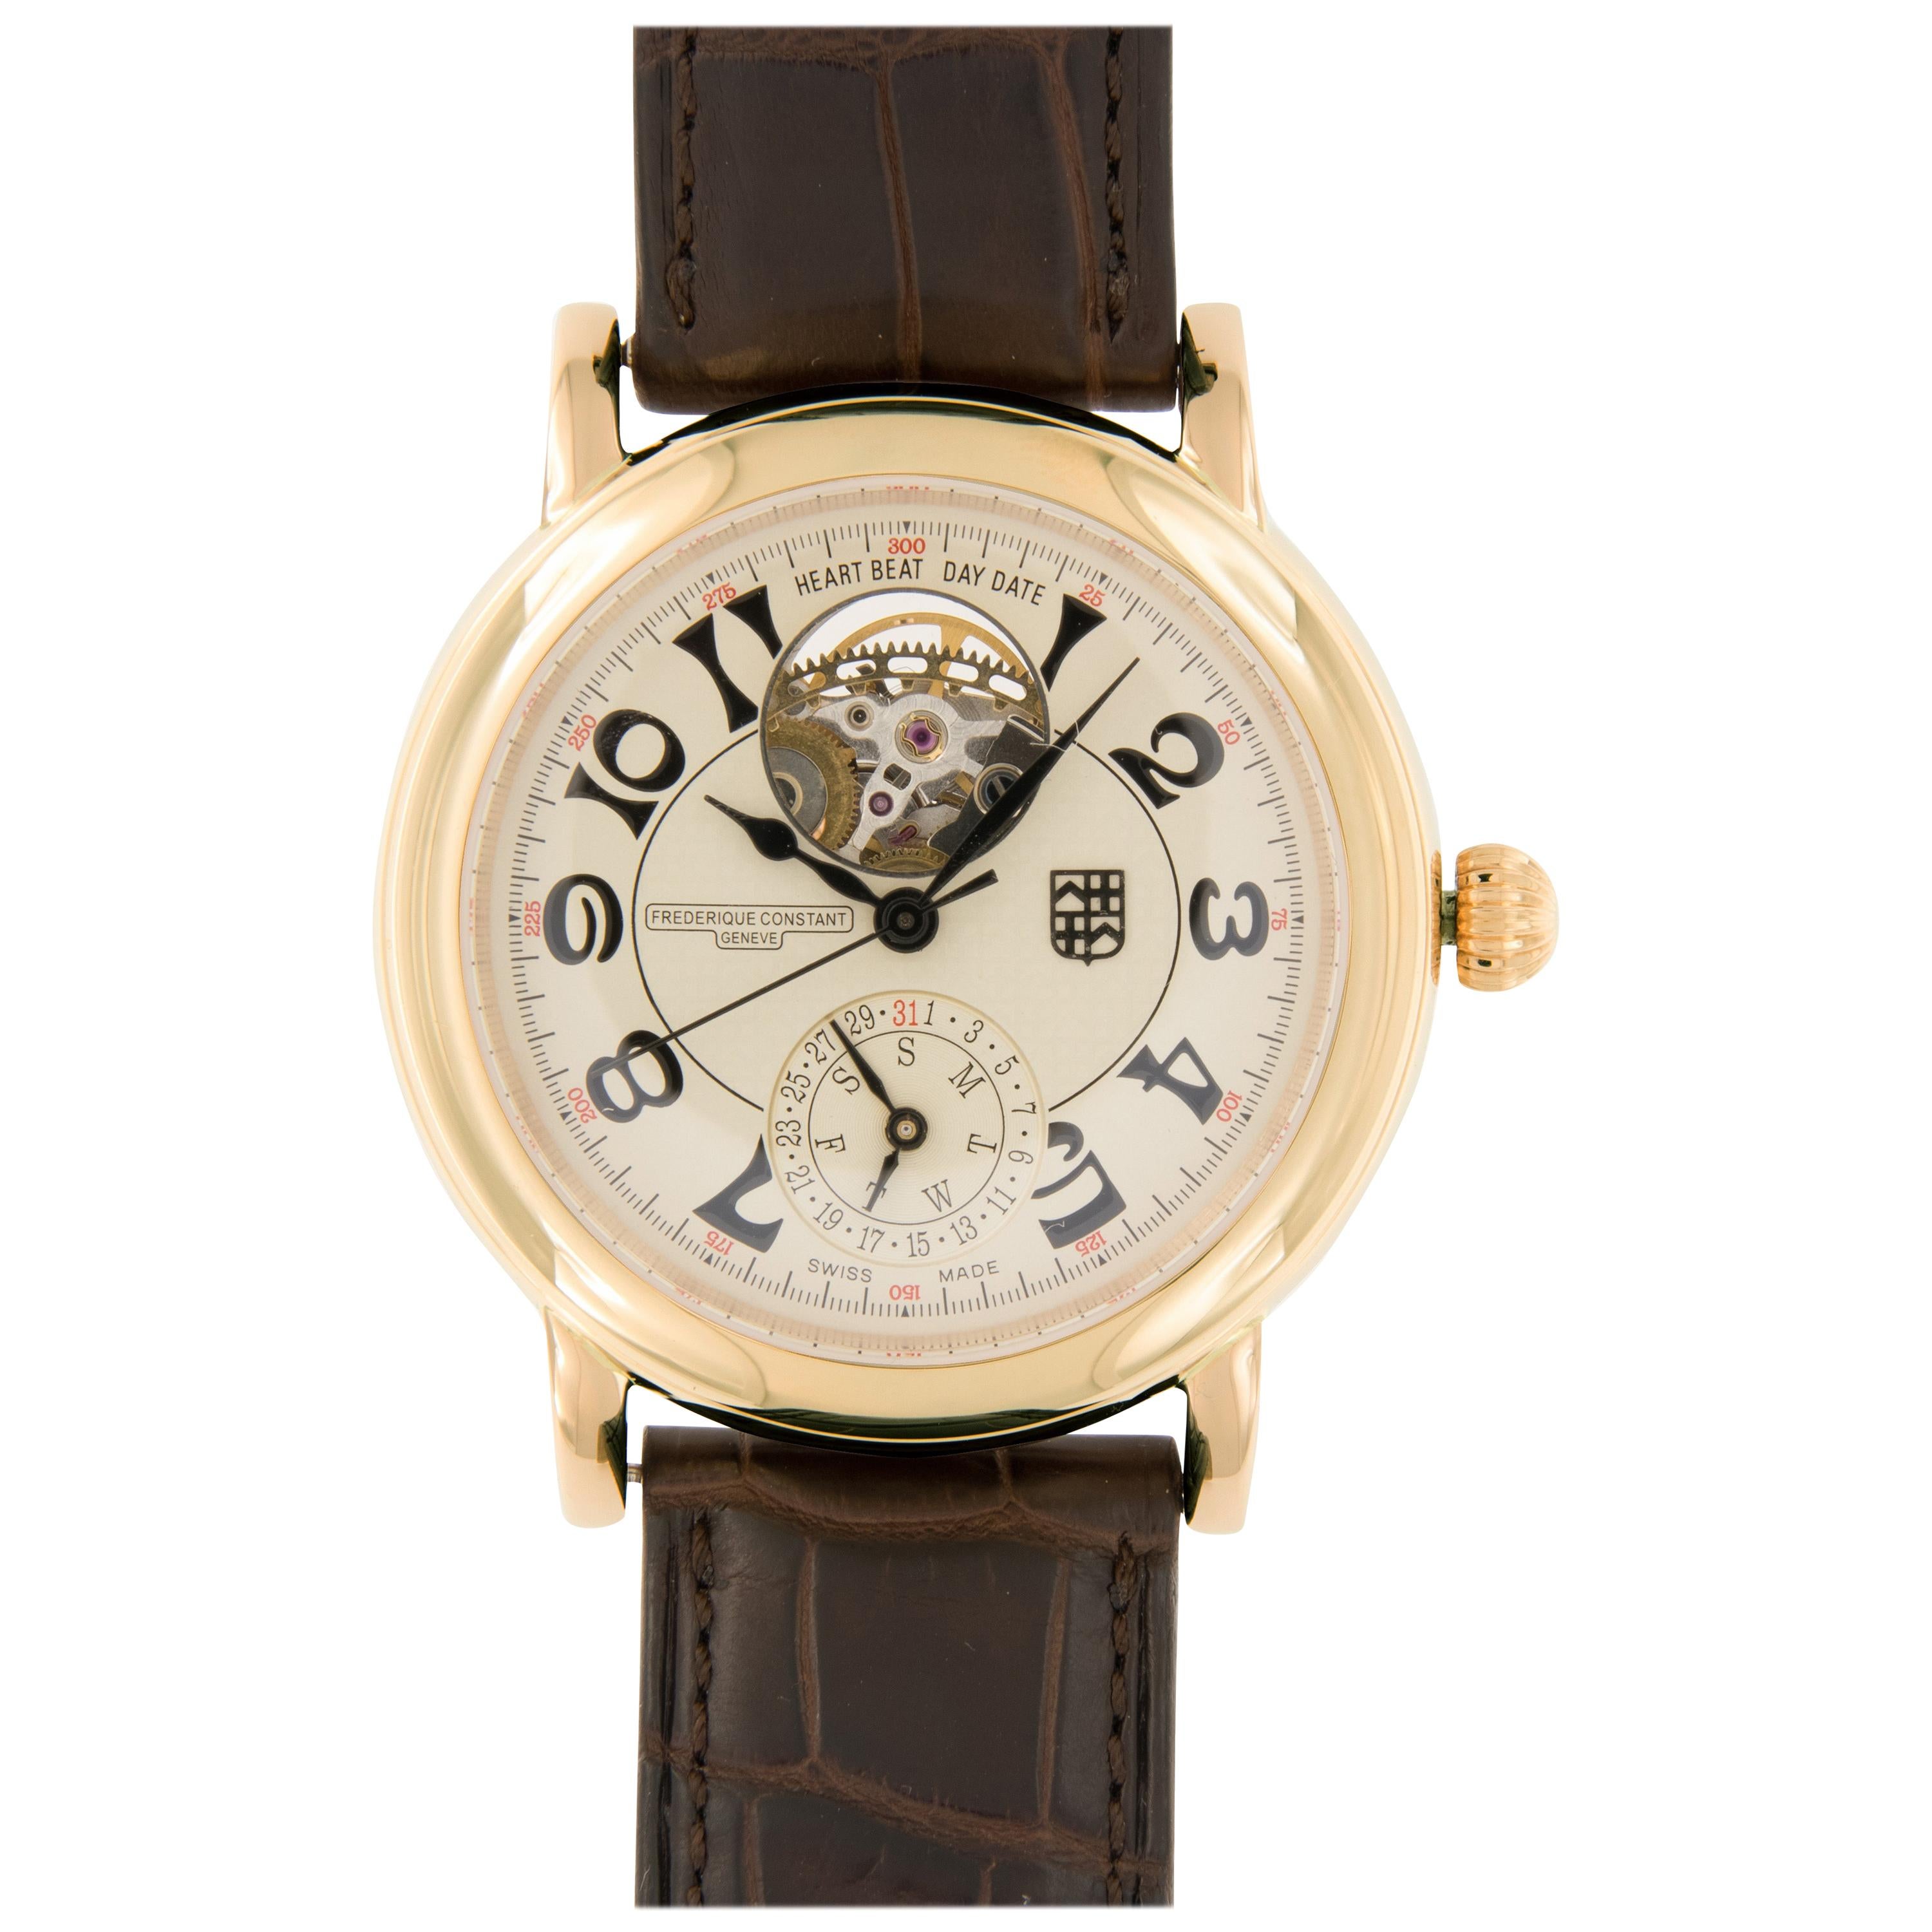 Limited Edition Frederique Constant Heart Beat Gold Watch